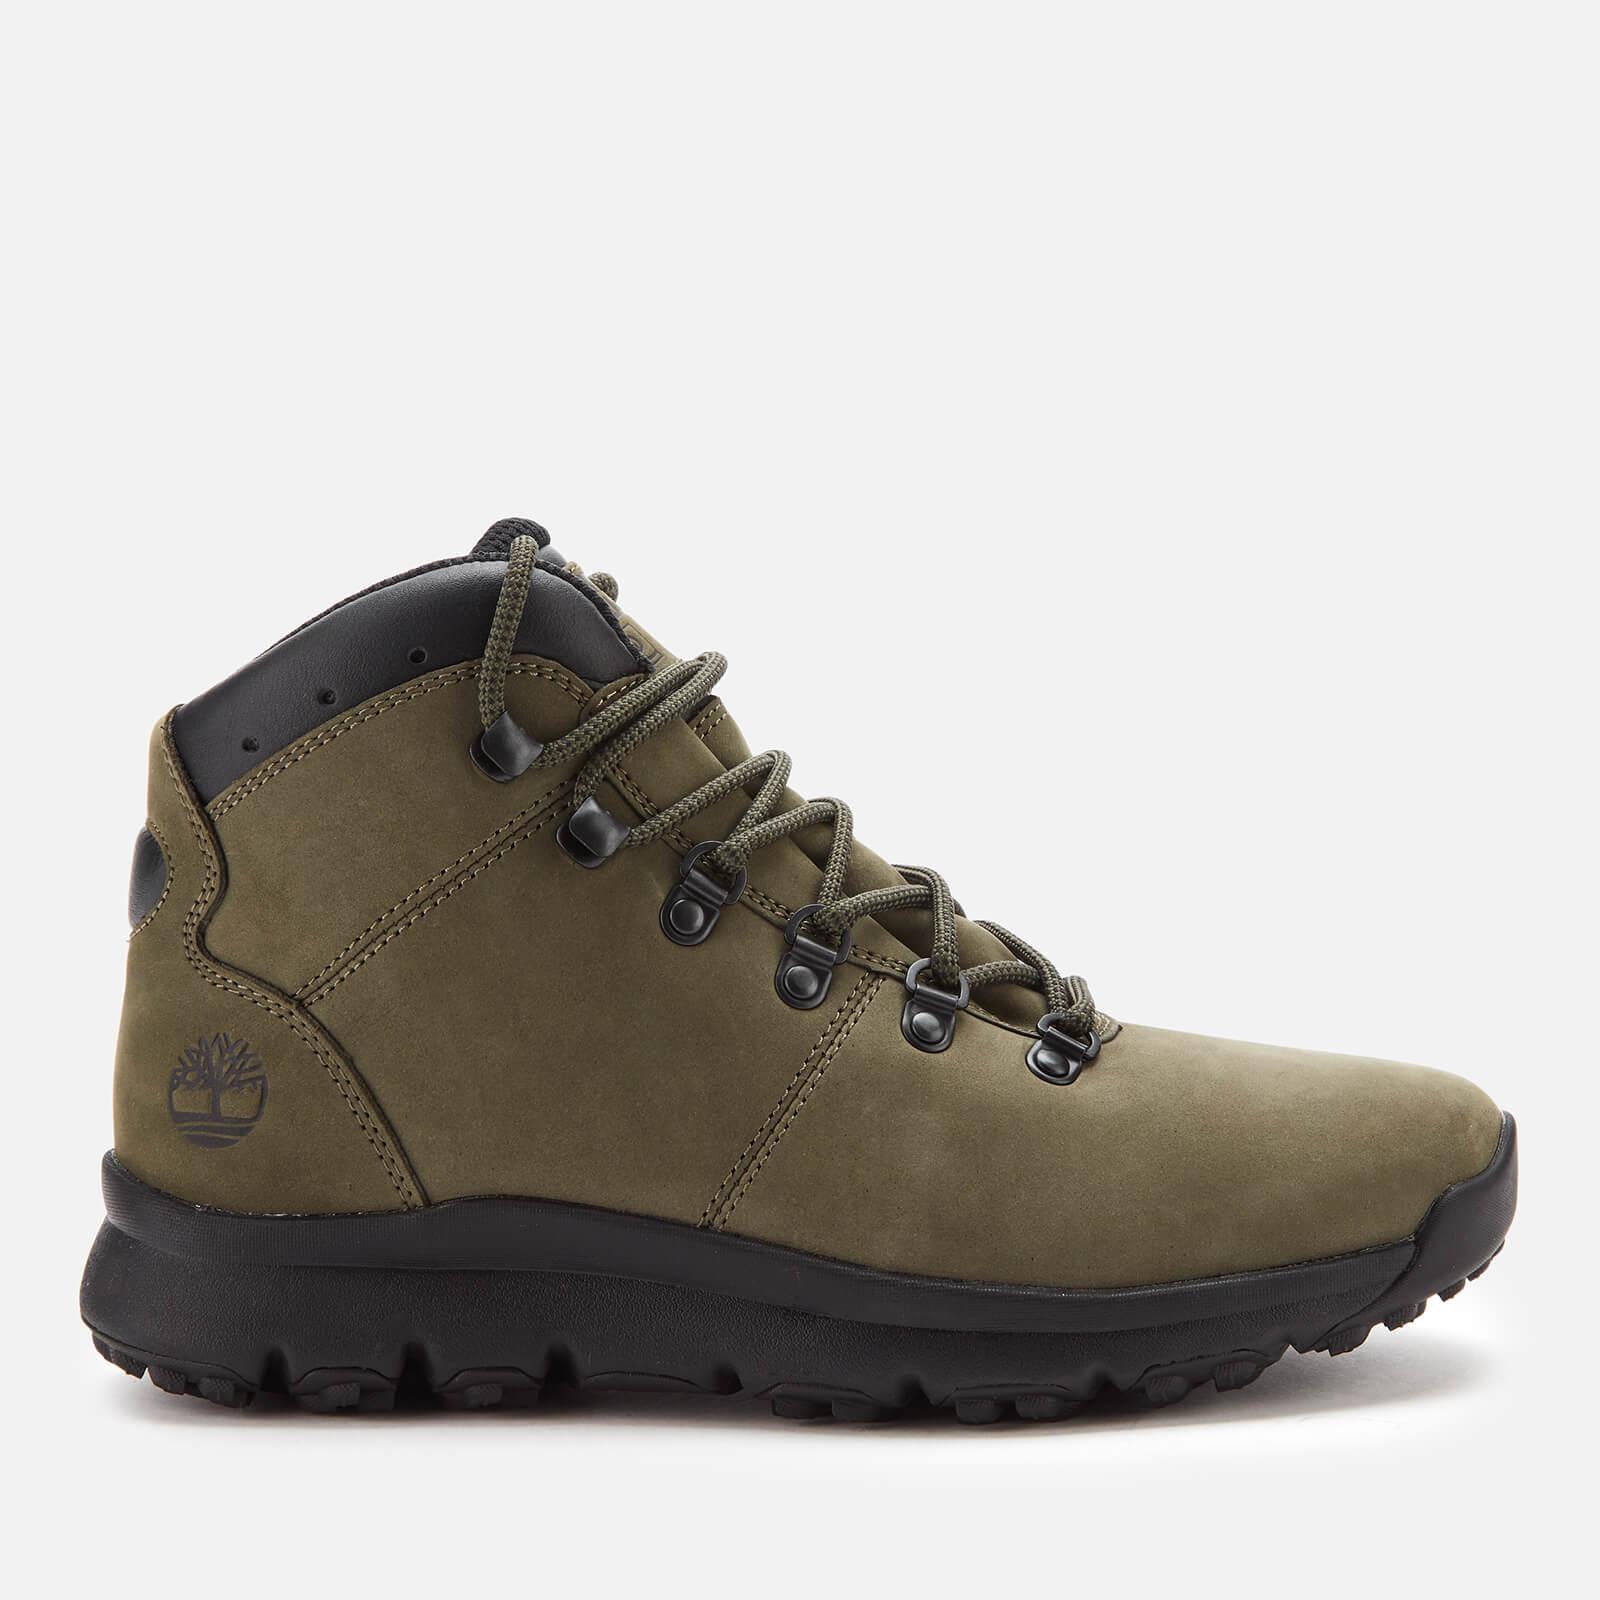 Timberland World Hiker Mid Outlet Sale, Save 64% | idiomas.to.senac.br